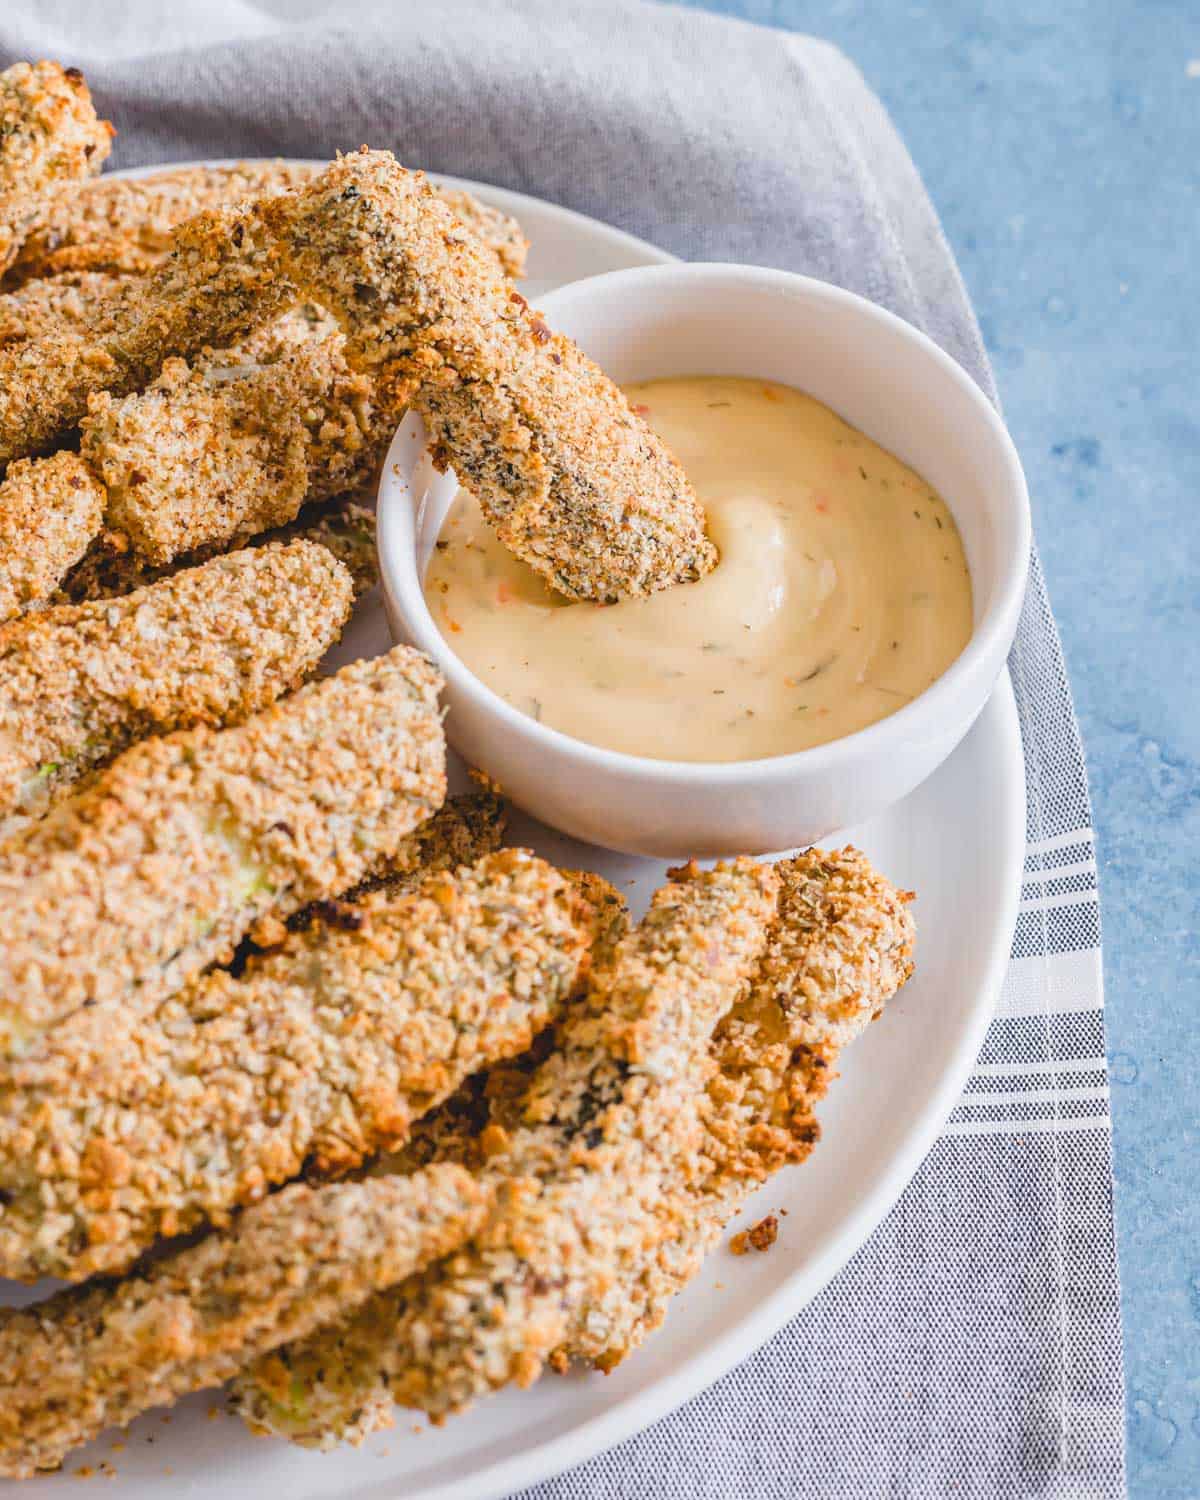 A baked zucchini fry in dipping sauce.